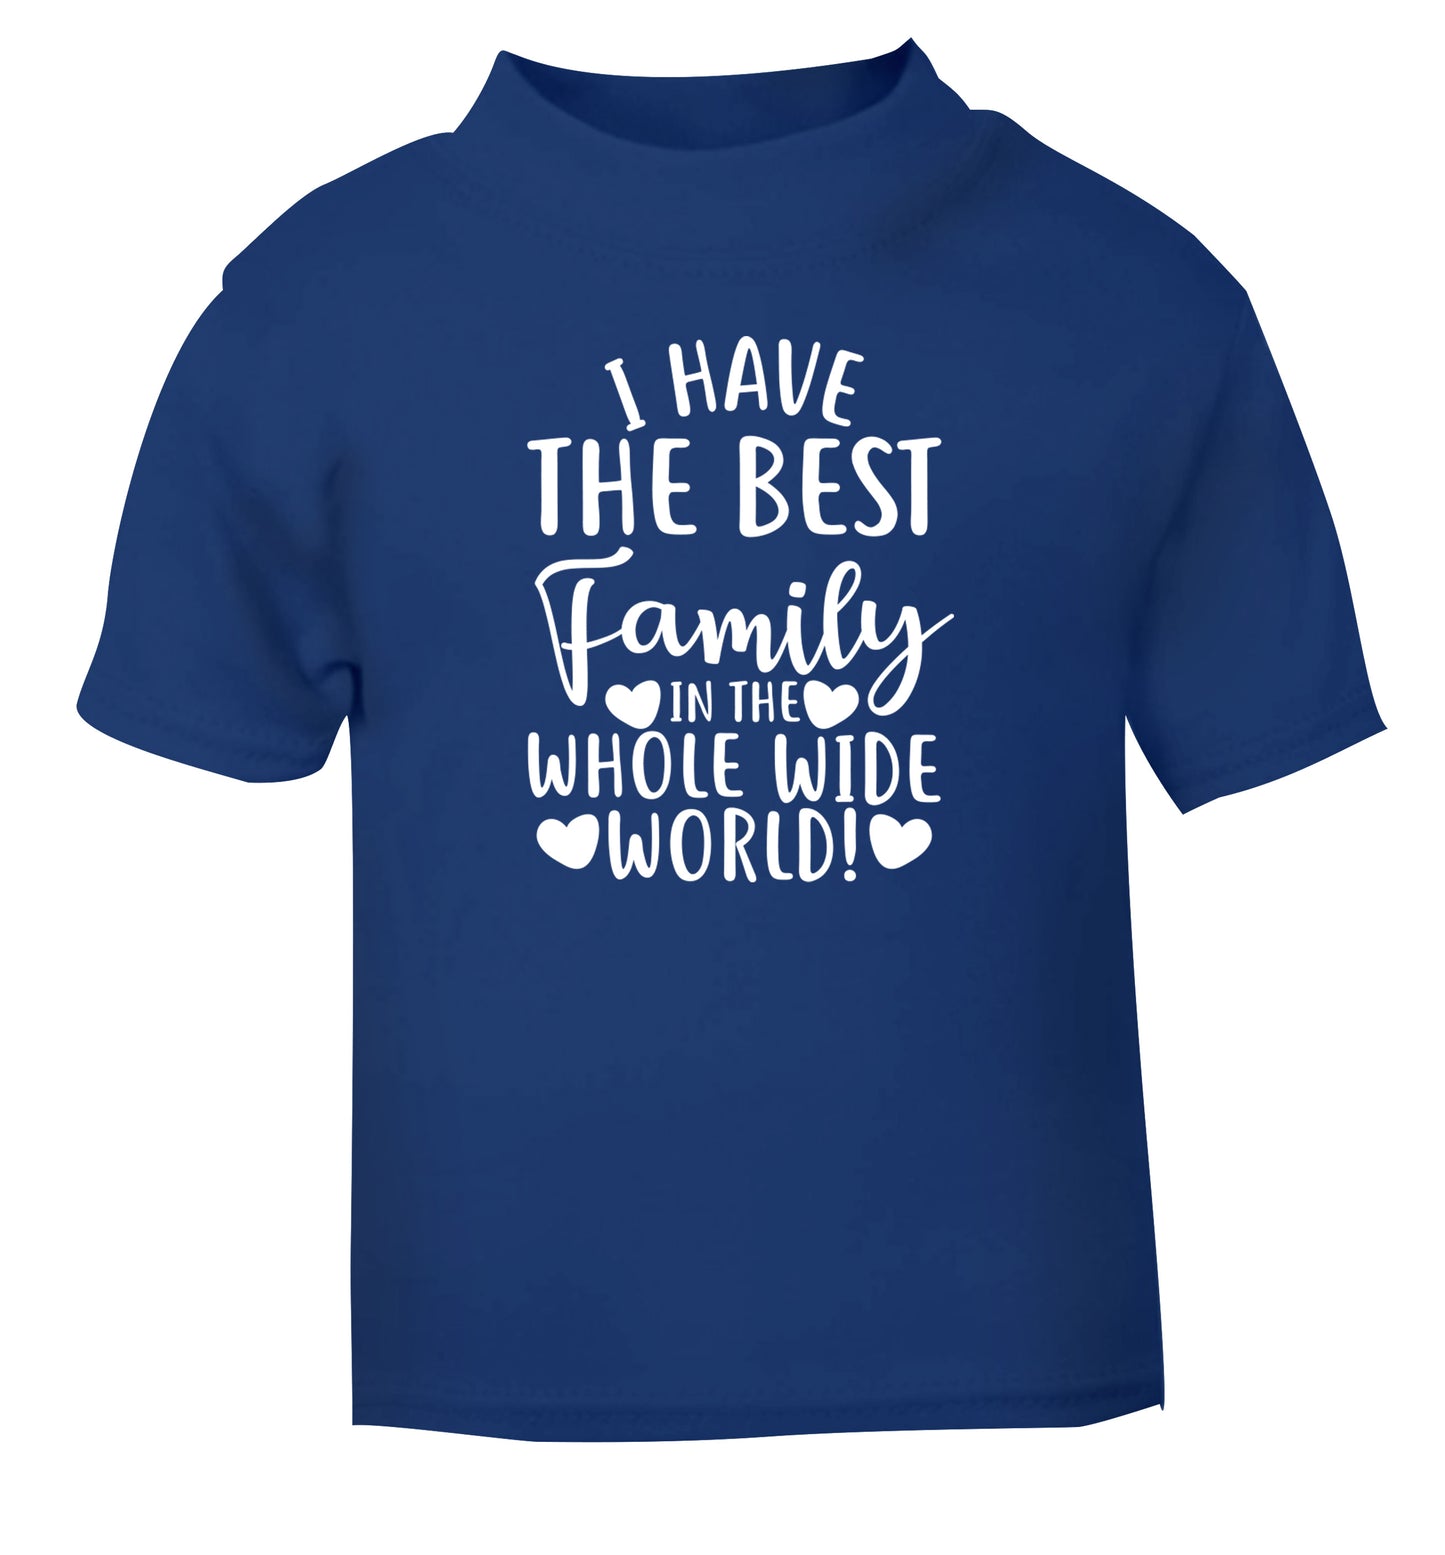 I have the best family in the whole wide world! blue Baby Toddler Tshirt 2 Years